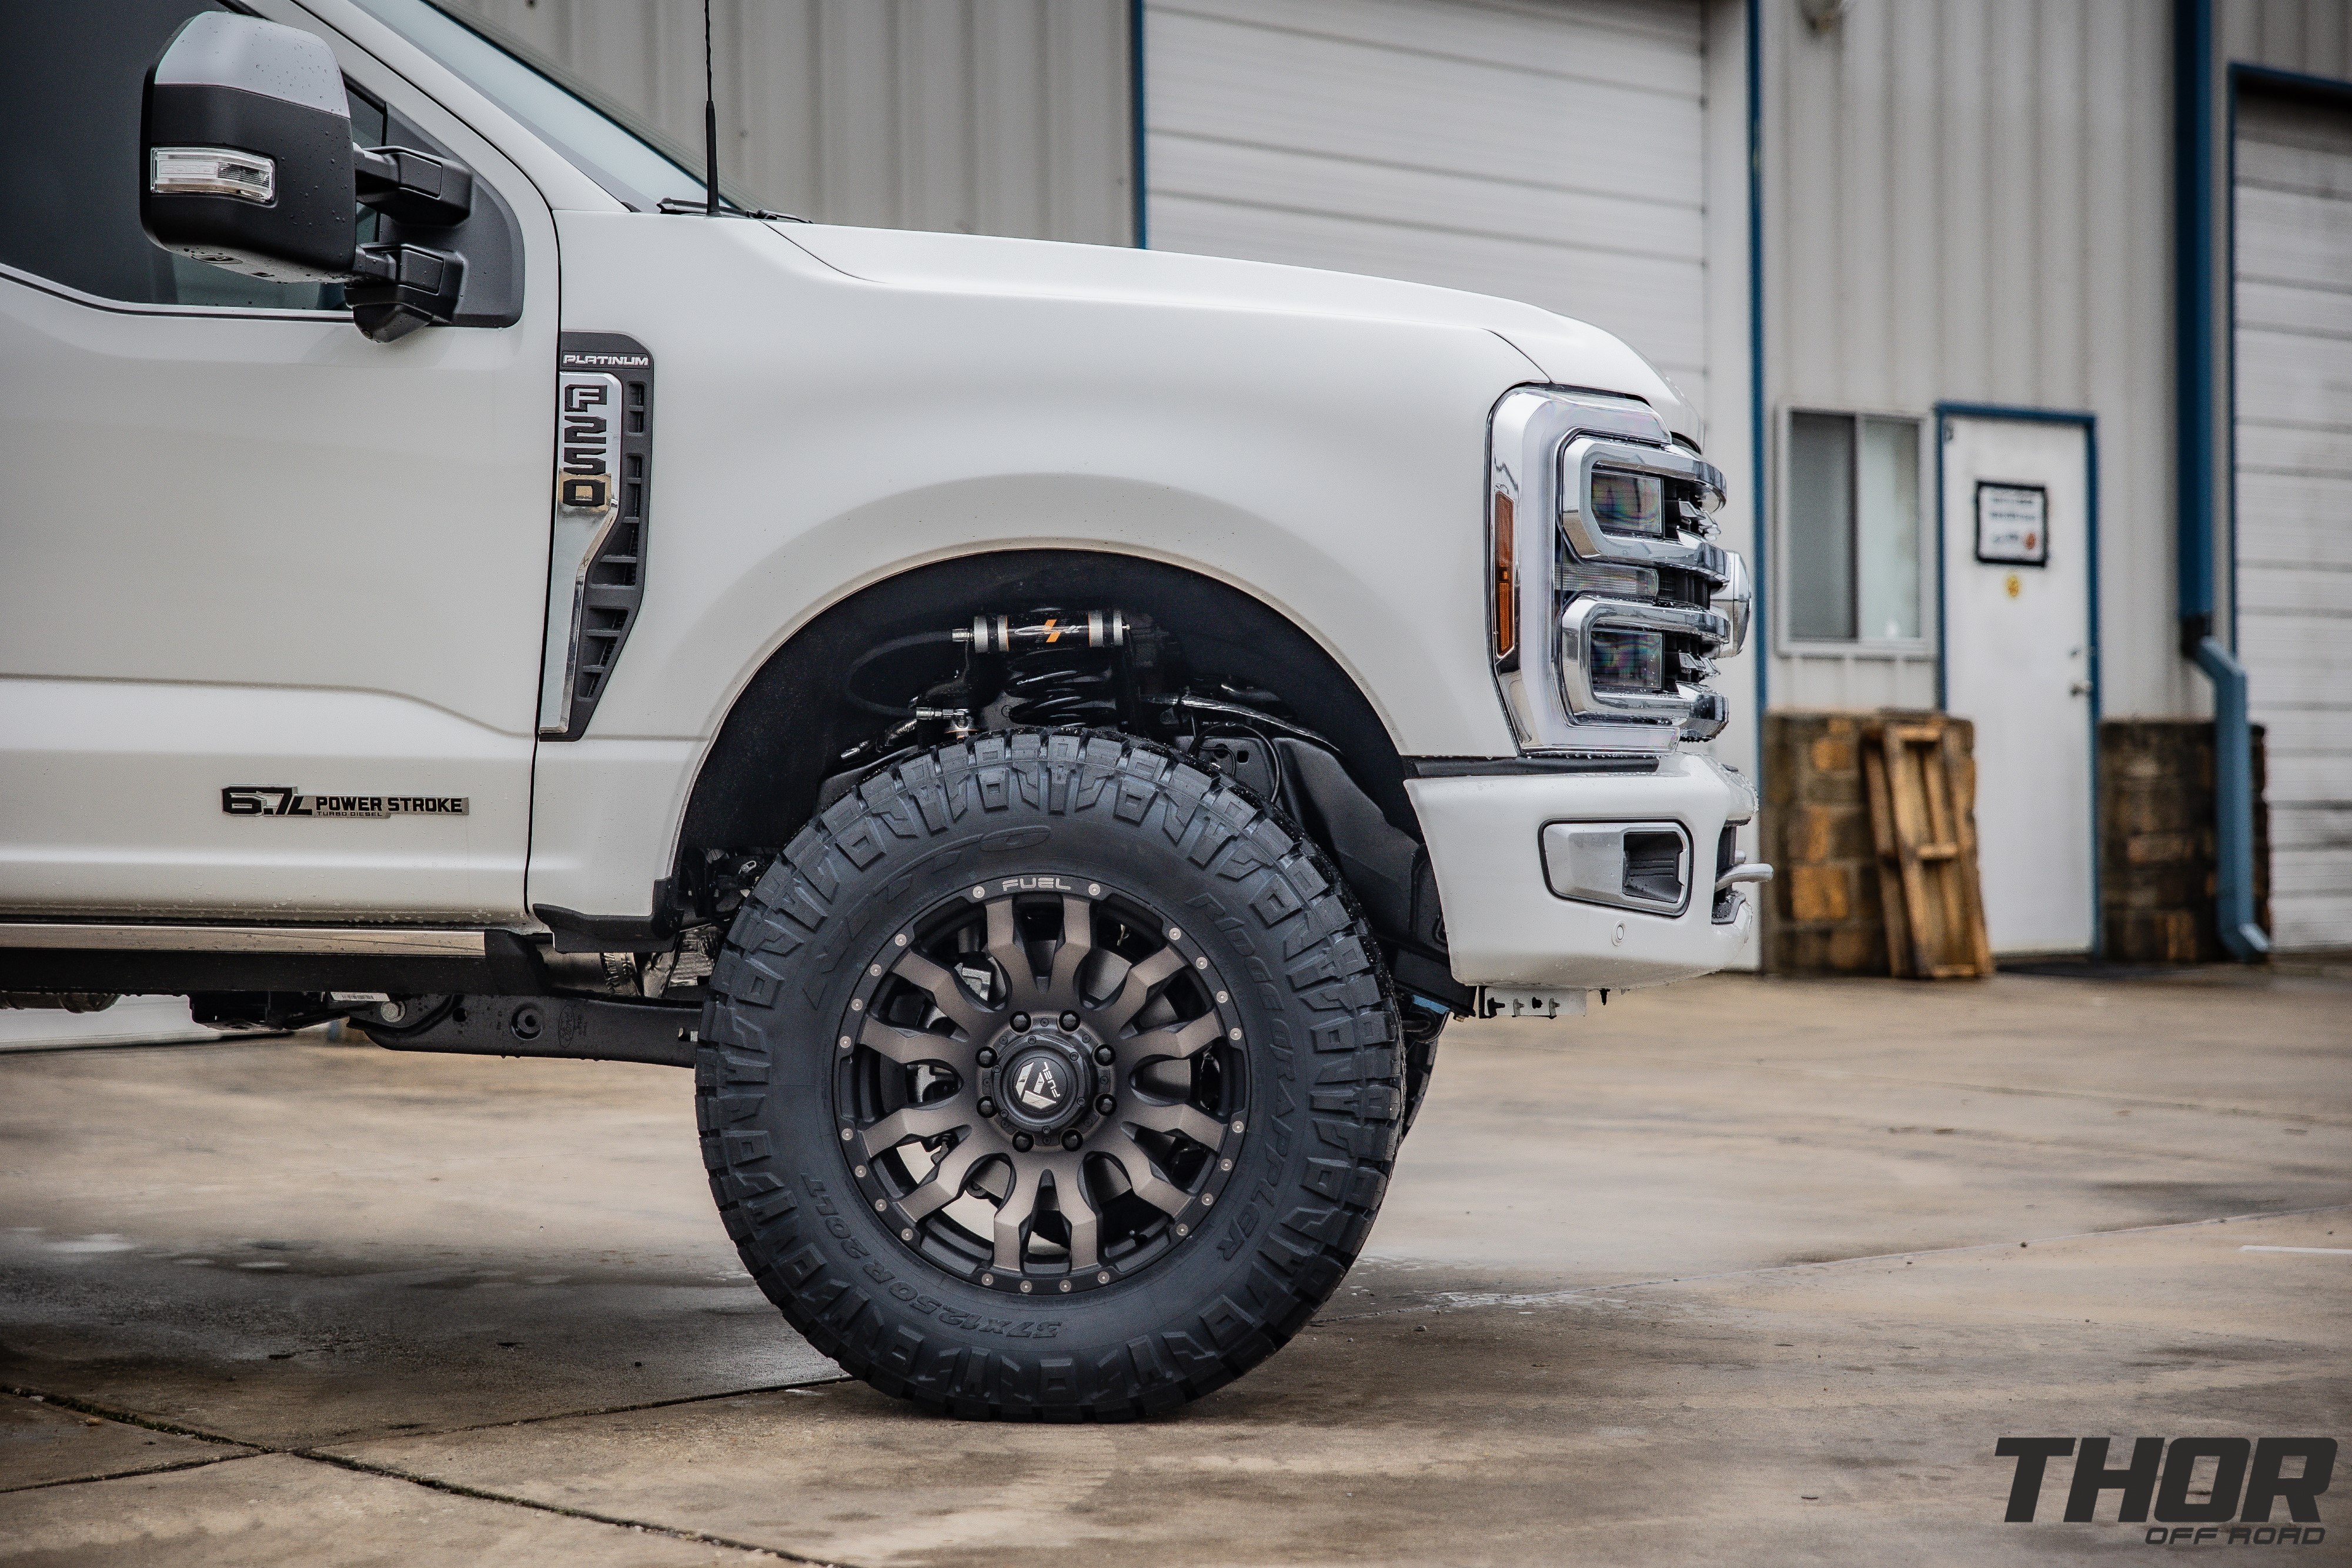 2024 Ford F-250 Super Duty Platinum in White with Carli Backcountry 3.5" Suspension Kit, Carli Sway Bar Drop Bracket, Carli Full Rear Spring Replacement, Carli High Mount Steering Stabilizer, Carli Low Mount Steering Stabilizer, Fuel Blitz 20x9" +20 Wheels, Nitto Ridge Grappler Tires